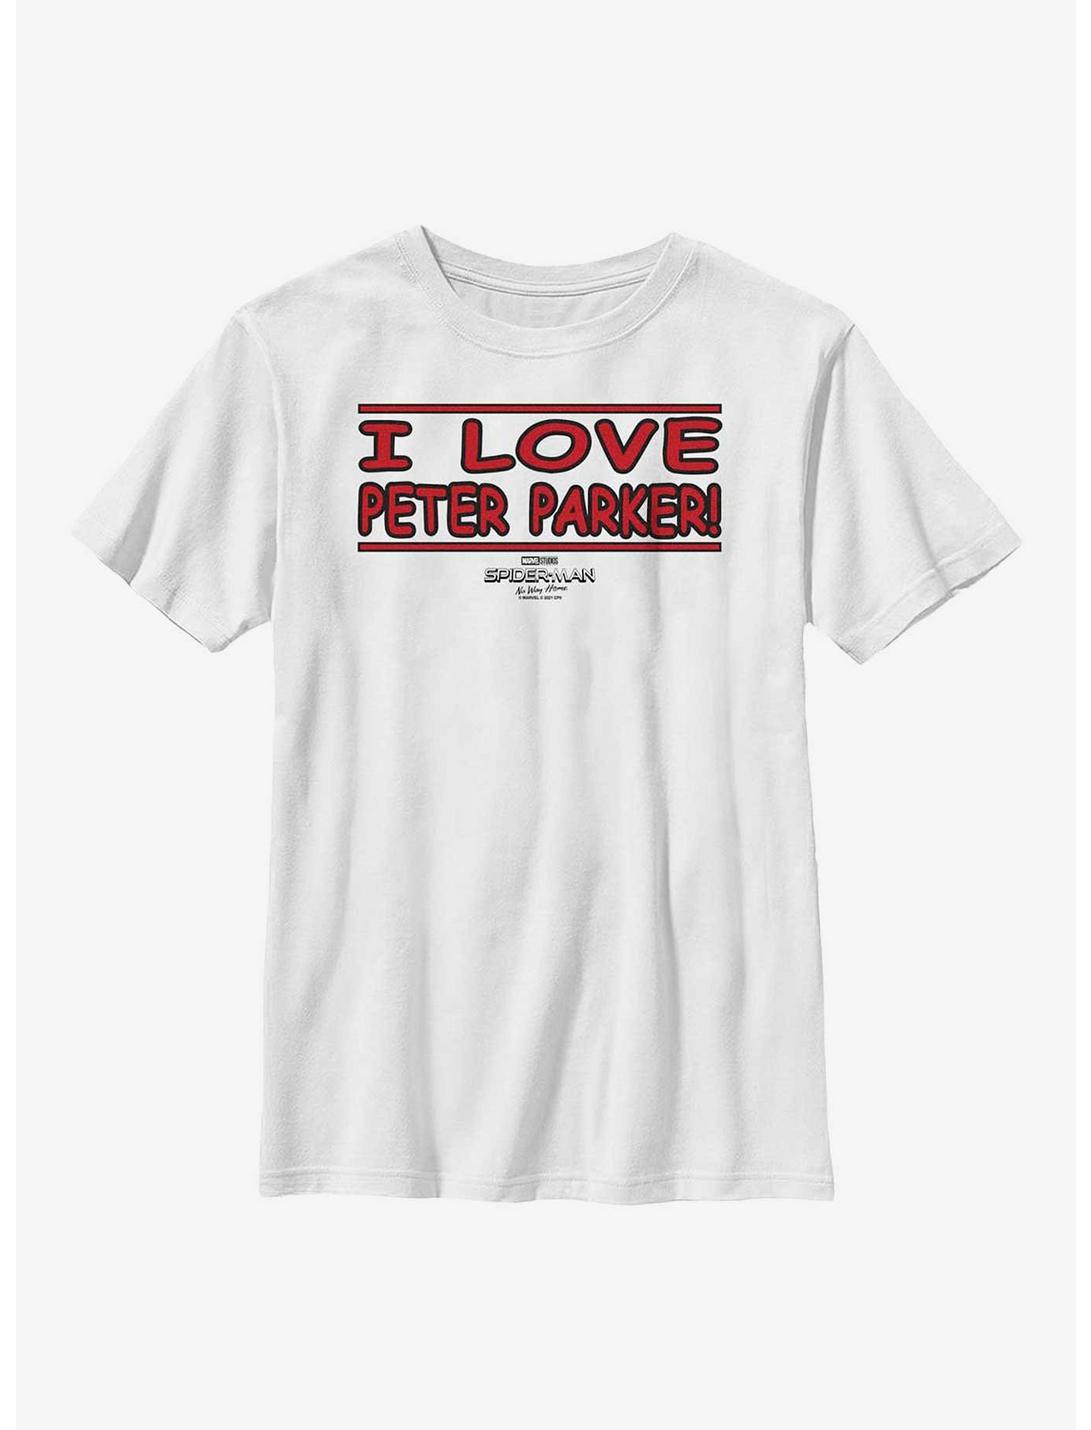 Marvel Spider-Man: No Way Home Love Peter Parker Youth T-Shirt, WHITE, hi-res